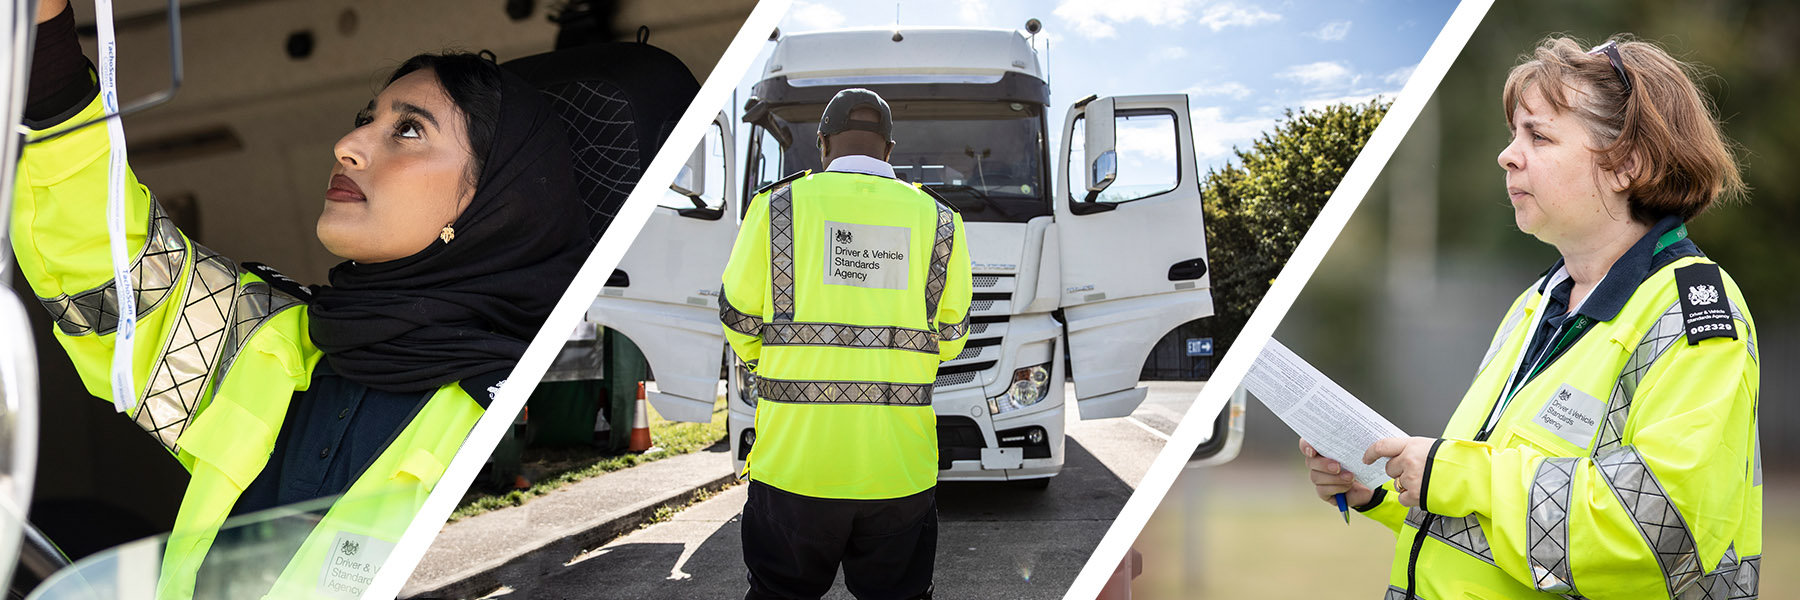 Banner image for DVSA Traffic Examiners: Depicts a 3 photo montage of DVSA traffic examiners performing their role.